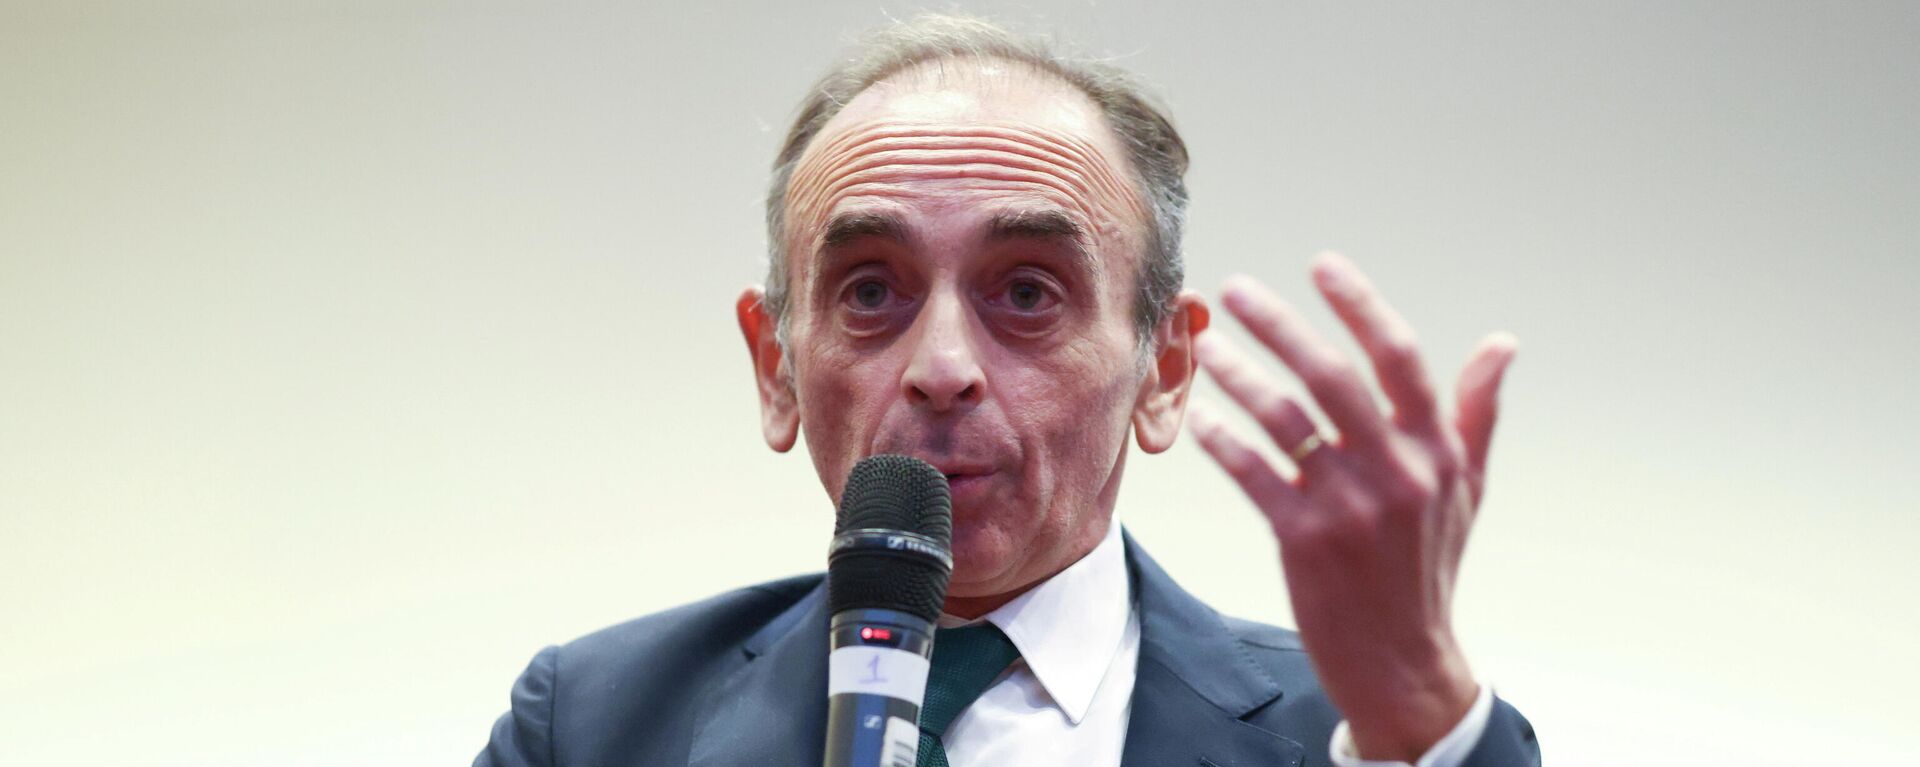 French right-wing commentator Eric Zemmour speaks at an event at the ILEC conference centre, London, Britain, November 19, 2021.  - Sputnik International, 1920, 30.11.2021